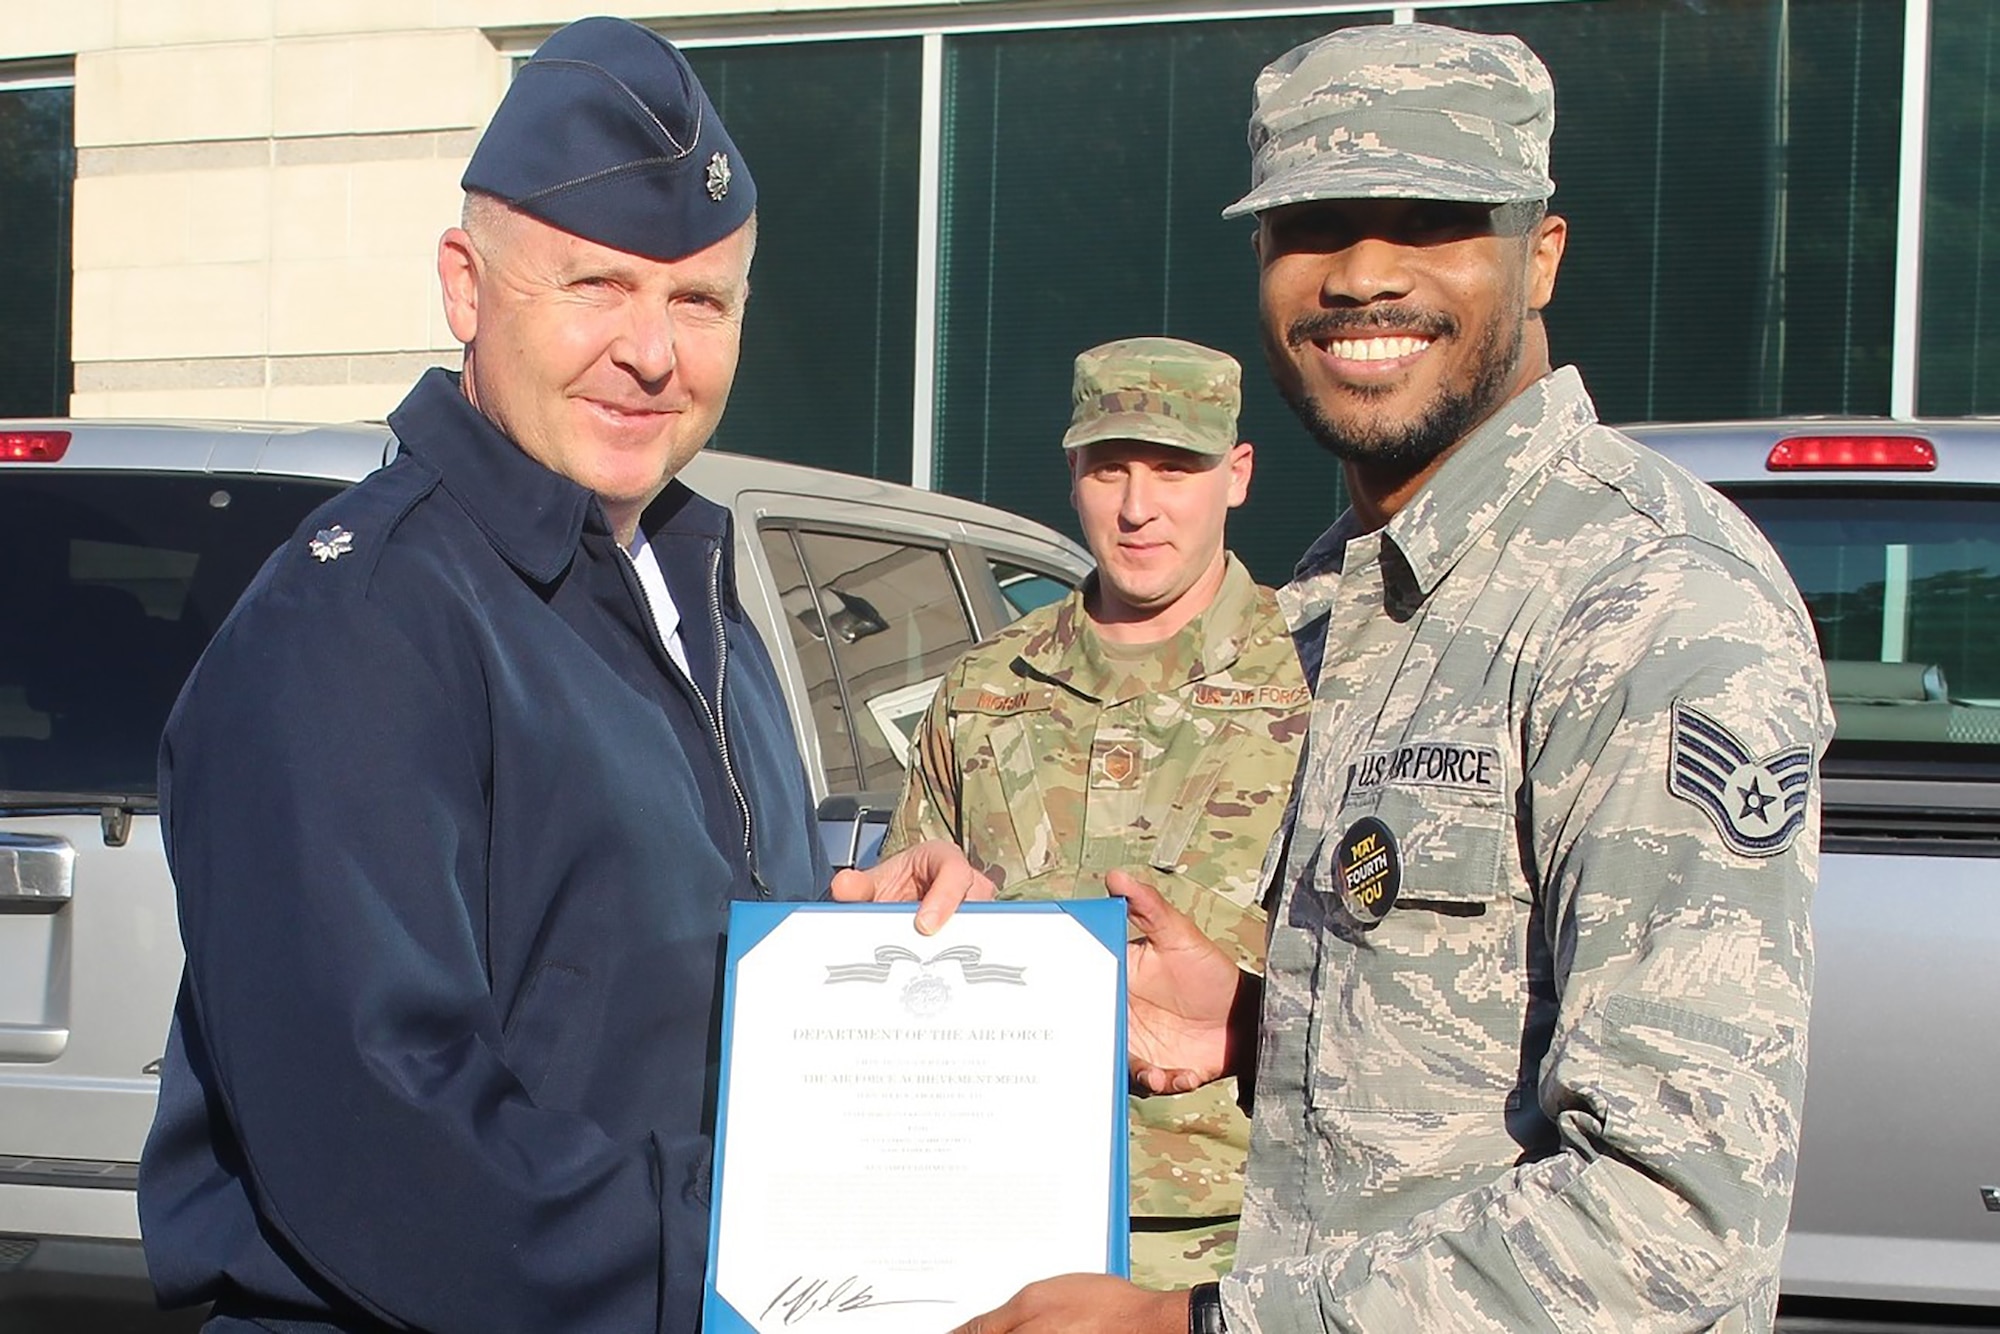 655th Intelligence, Surveillance, and Reconnaissance Wing, 16th Intelligence Squadron Commander Lt. Col. Jeffrey Derr presents the Air Force Achievement Medal to Staff Sgt. Caldwell (first name withheld) November 2, 2019.  Caldwell earned the medal for heroic actions on October 6, when he saved a young girl’s life by preventing her from jumping off an interstate on-ramp.  First responders claimed the 60-foot drop would have been fatal. (Courtesy photo)